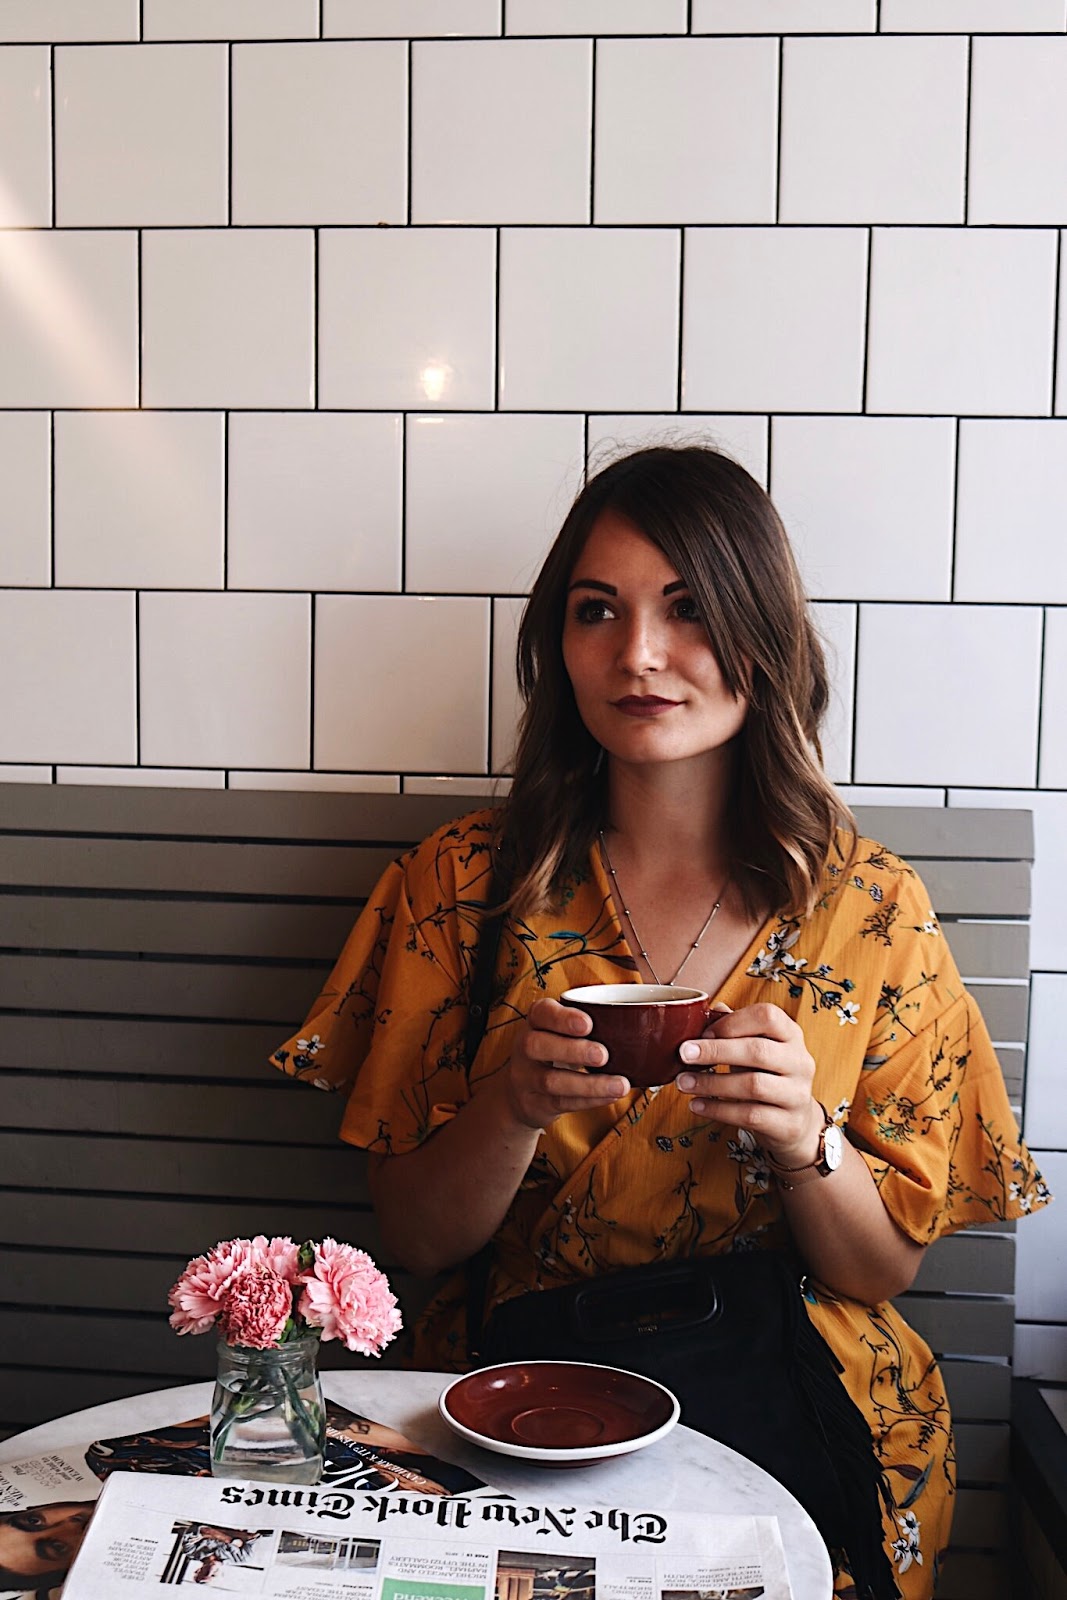 pauline-dress-blog-mode-deco-lifestyle-travel-voyage-europe-londres-angleterre-idees-visites-parcours-touristique-instagram-instagrammable-lieux-notting-hill-cafe-coffee